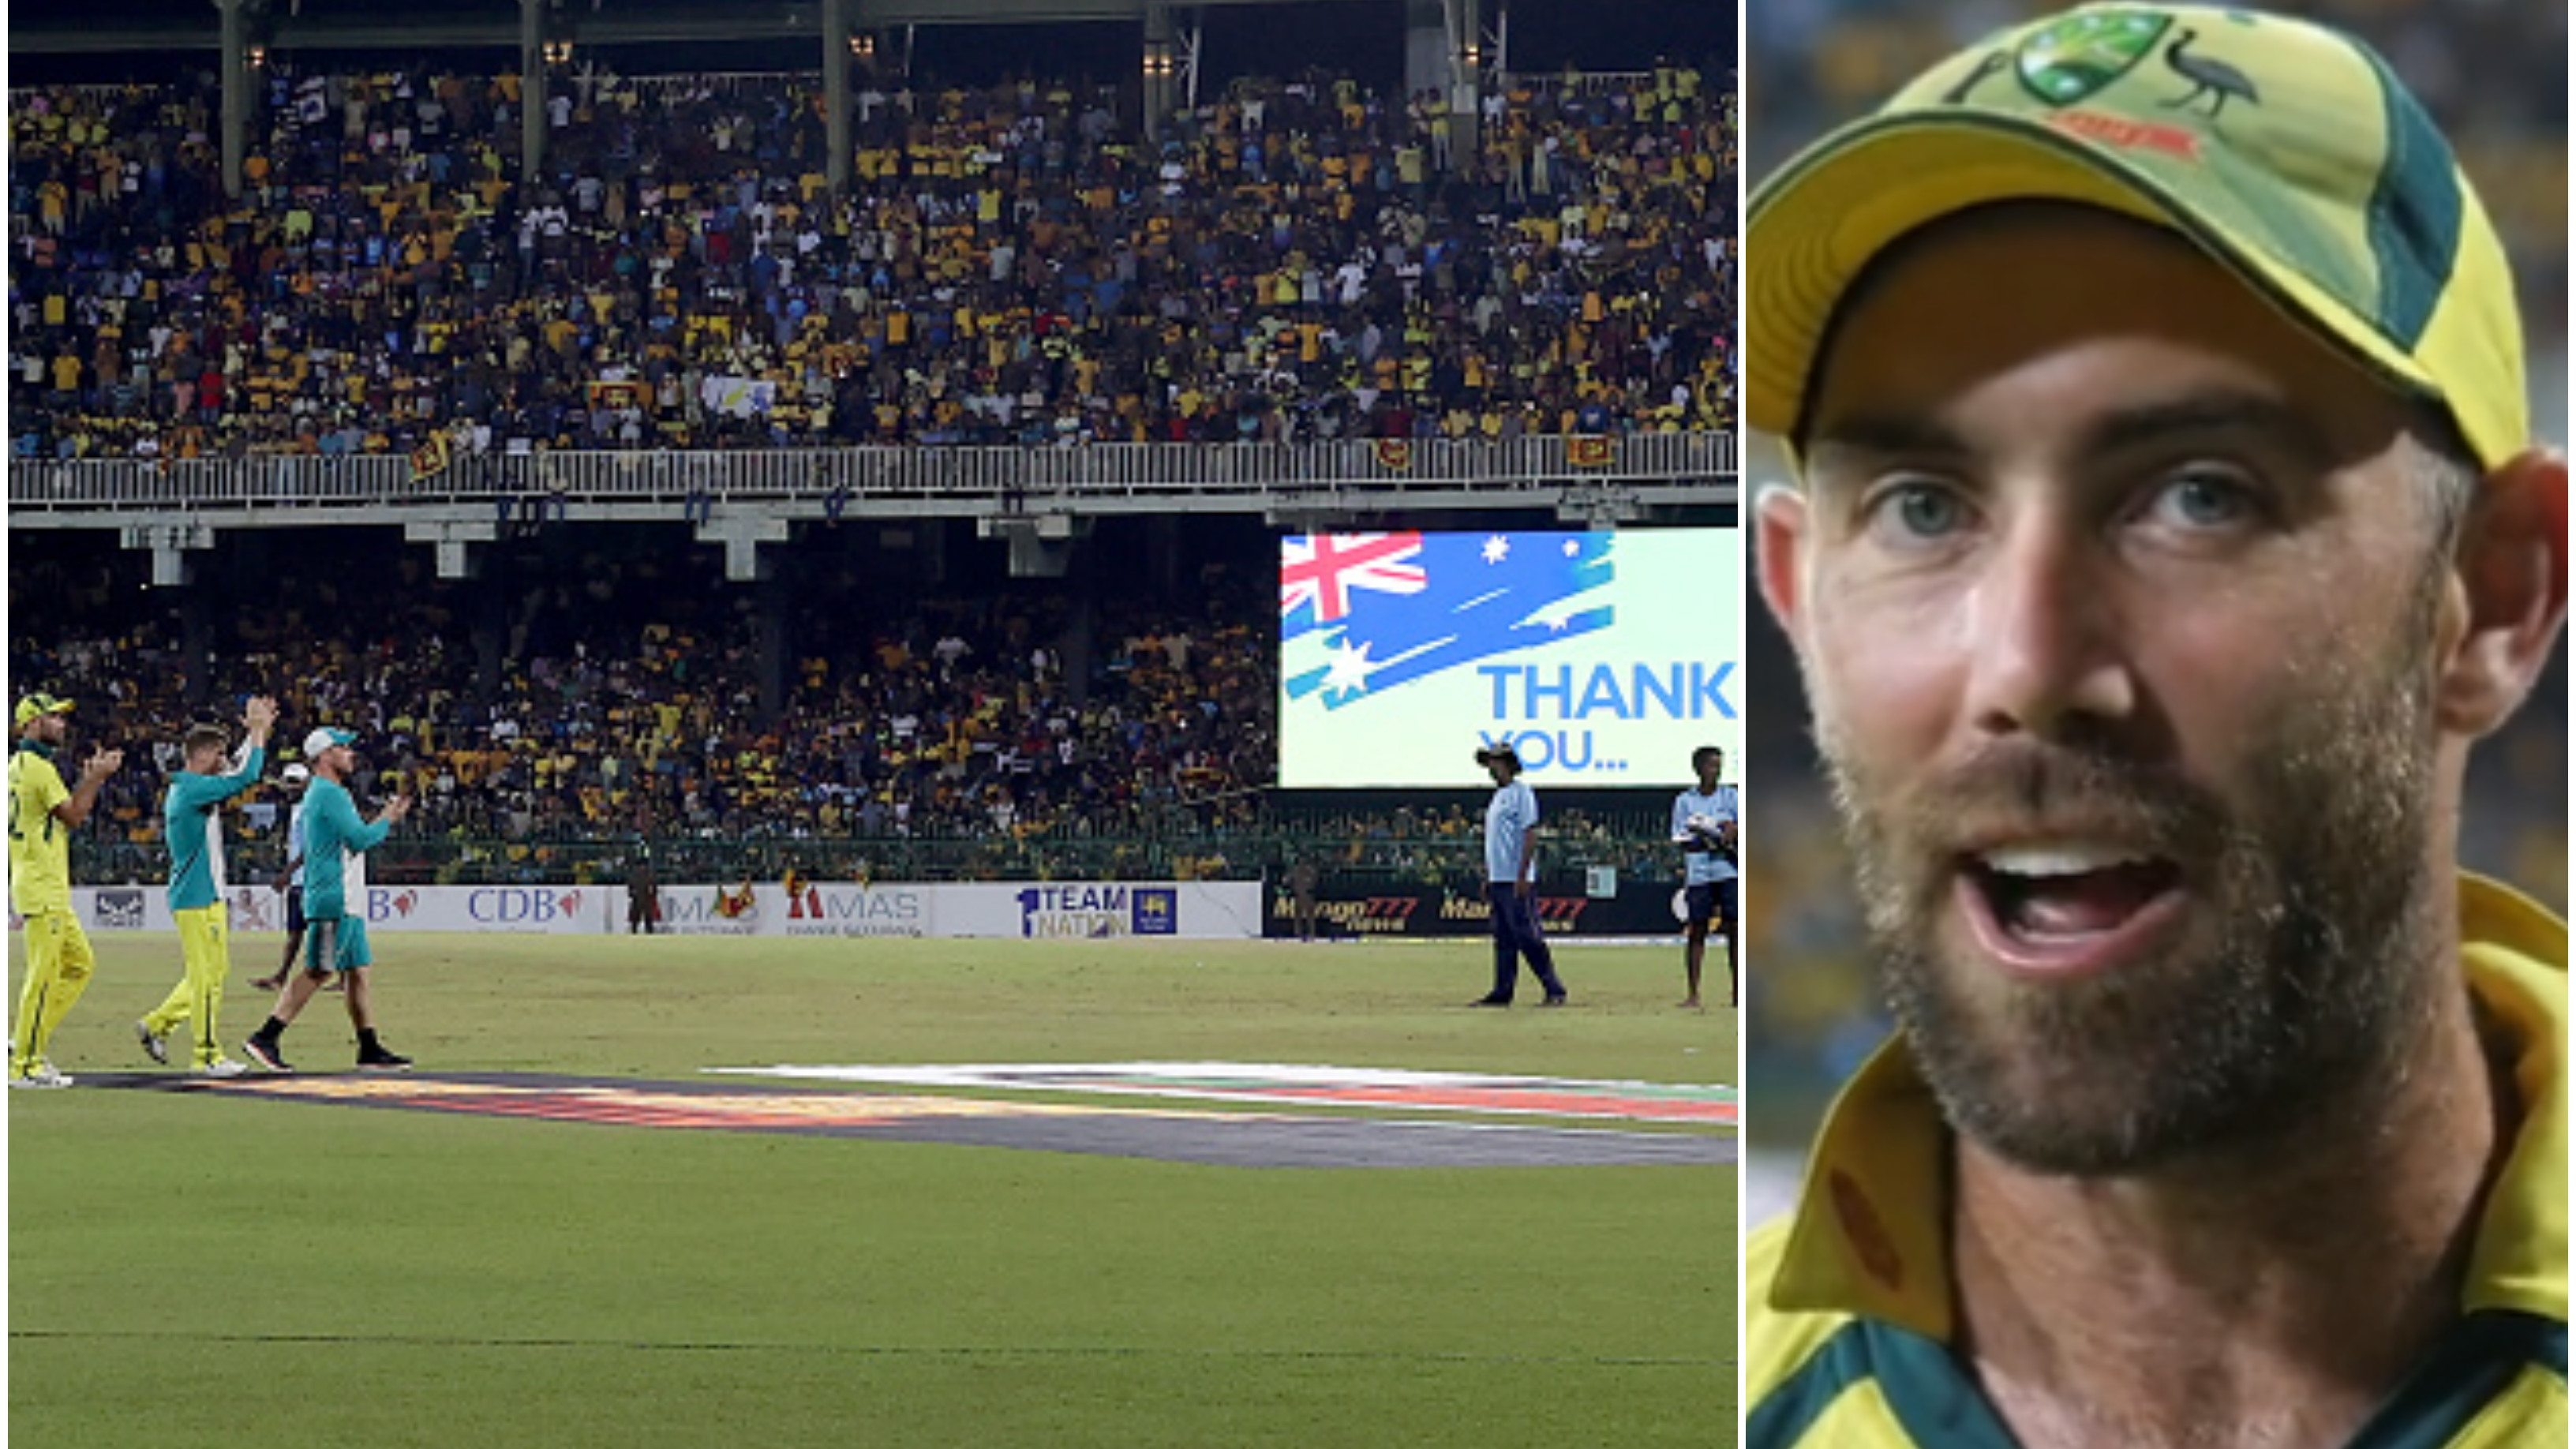 SL v AUS 2022: WATCH – “Pretty extraordinary”, Maxwell overwhelmed by Colombo crowd gesture during 5th ODI